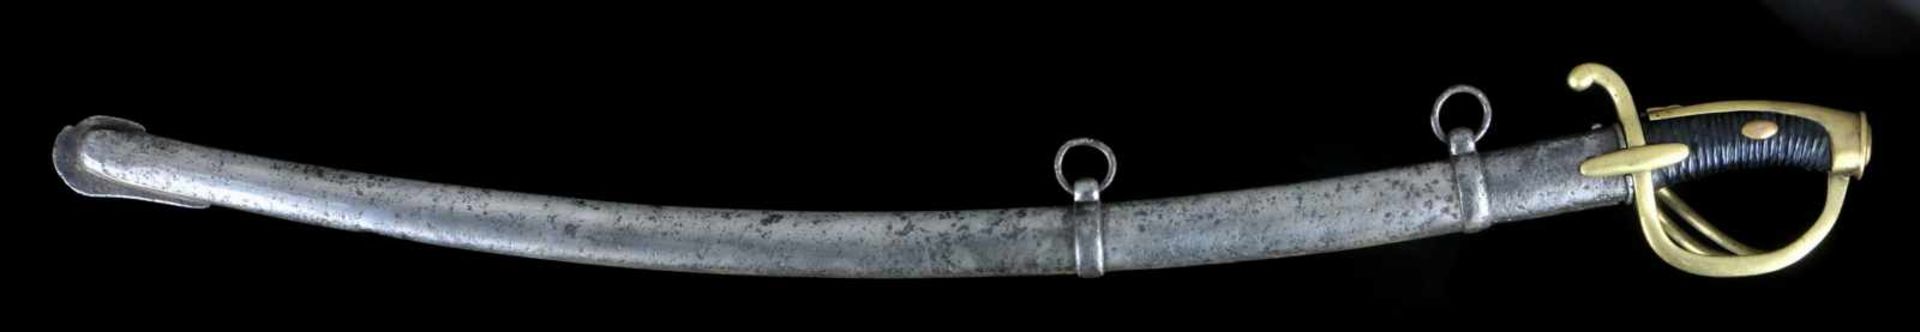 A FRENCH AN XI LIGHT CAVALRY TROOPER'S SWORD, NAPOLEON ARMY. FRANCE, EARLY 19TH CENTURY, EMPIRE - Bild 11 aus 17